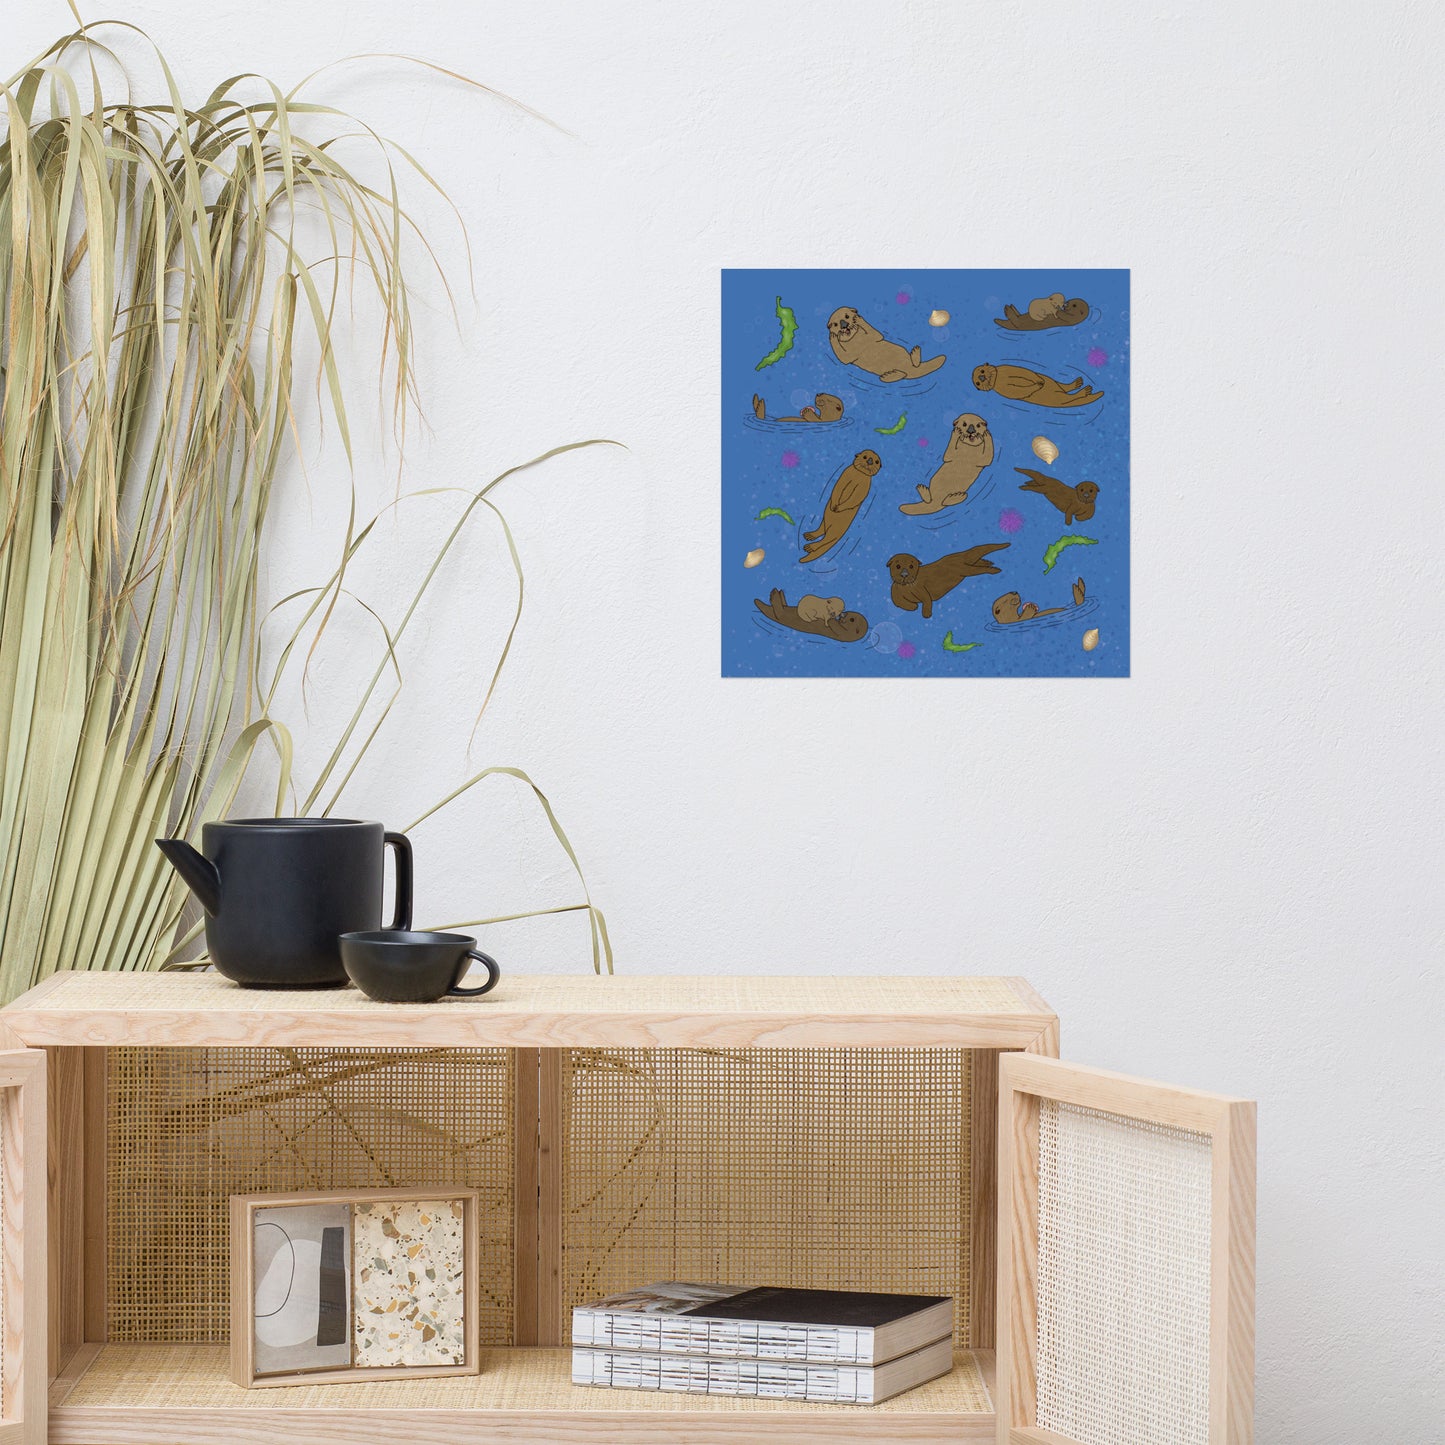 16 x 16 inch matte poster art print. Hand illustrated digital drawing of cute sea otters with accenting seashells, seaweed, and sea urchins on a blue background. Shown on wall above wicker cabinet with black tea pot and grass decor.